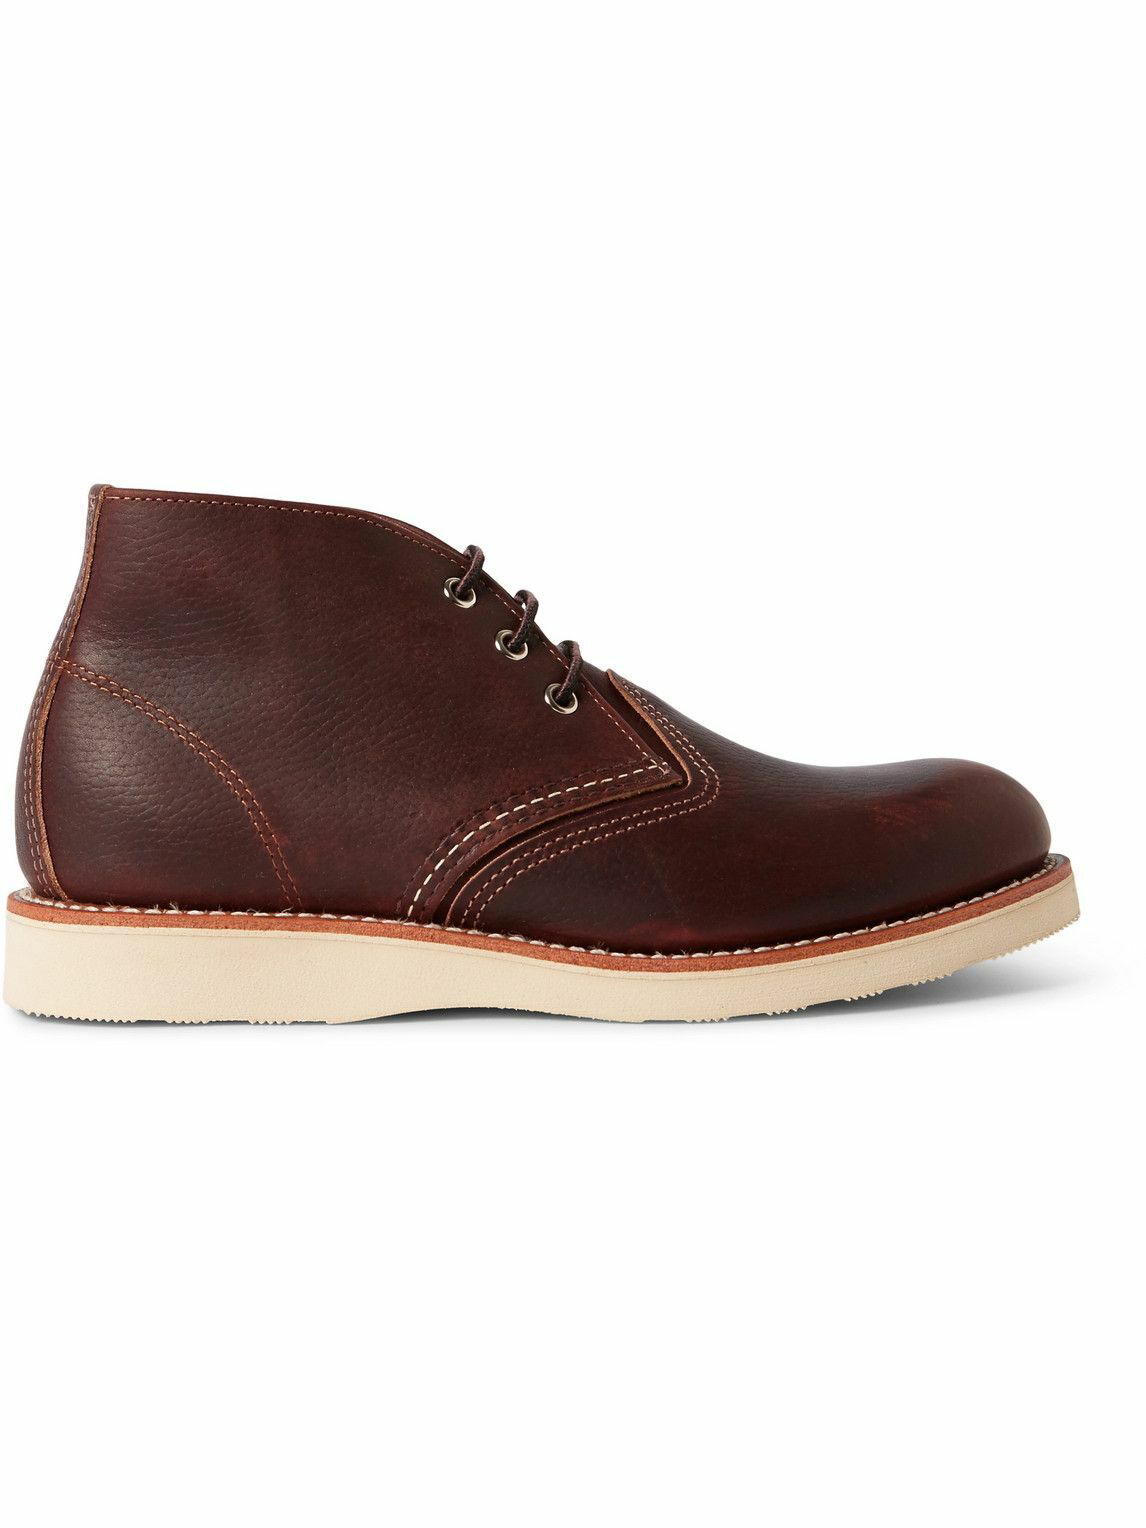 Red Wing Shoes - 2952 Rover Burnished Leather Boots - Brown Red